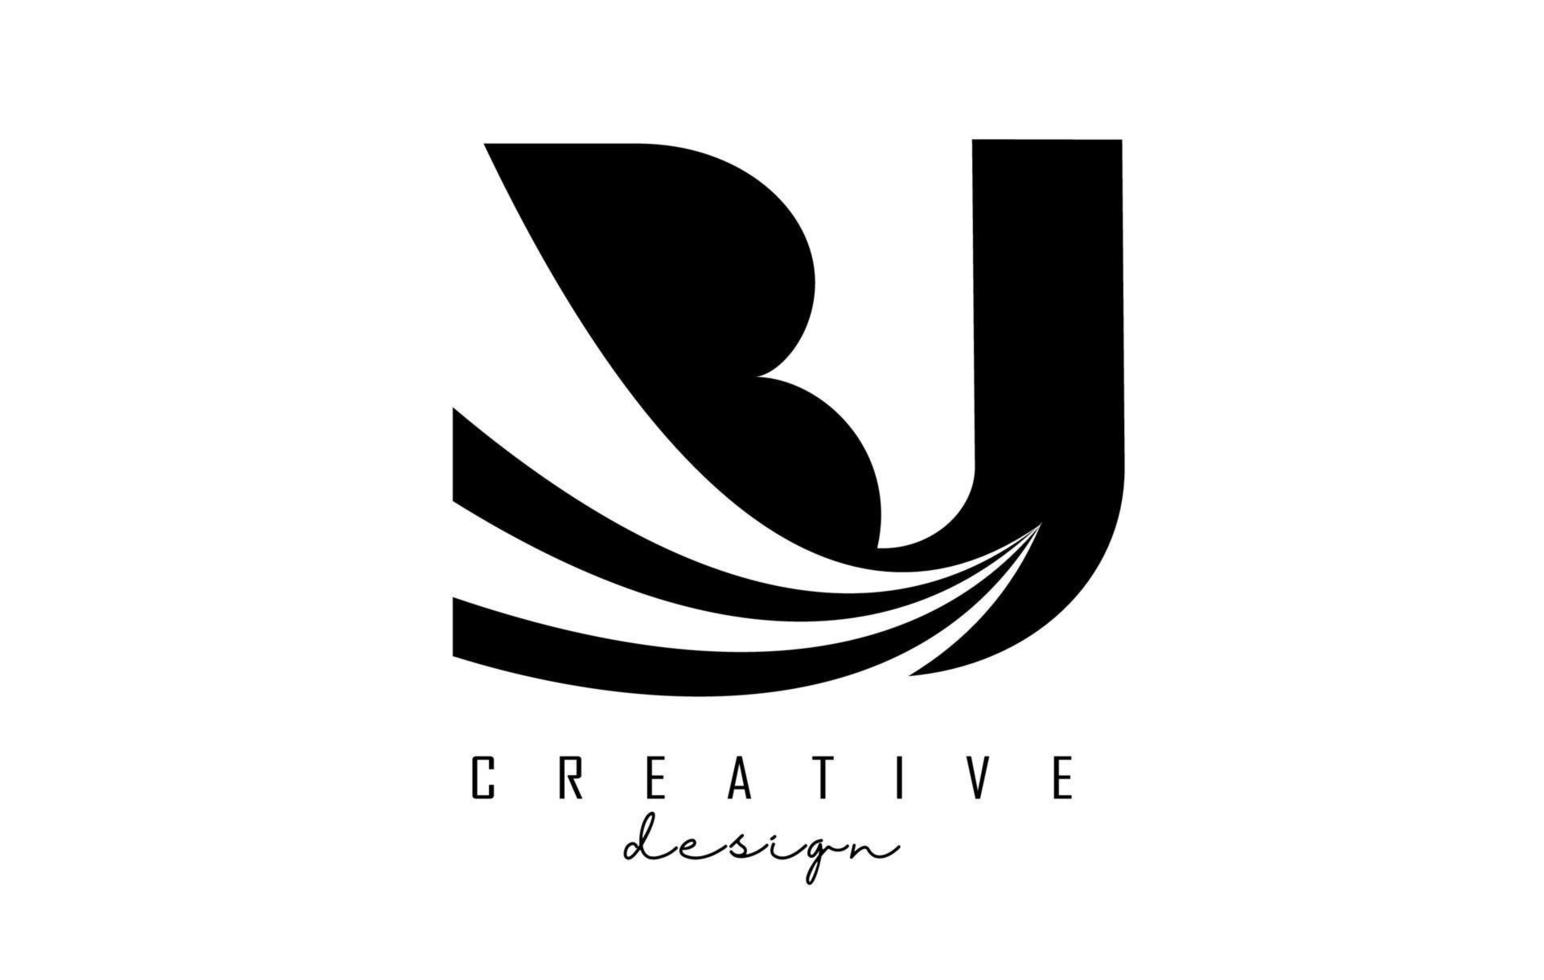 Creative black letters Bj b j logo with leading lines and road concept design. Letters with geometric design. vector